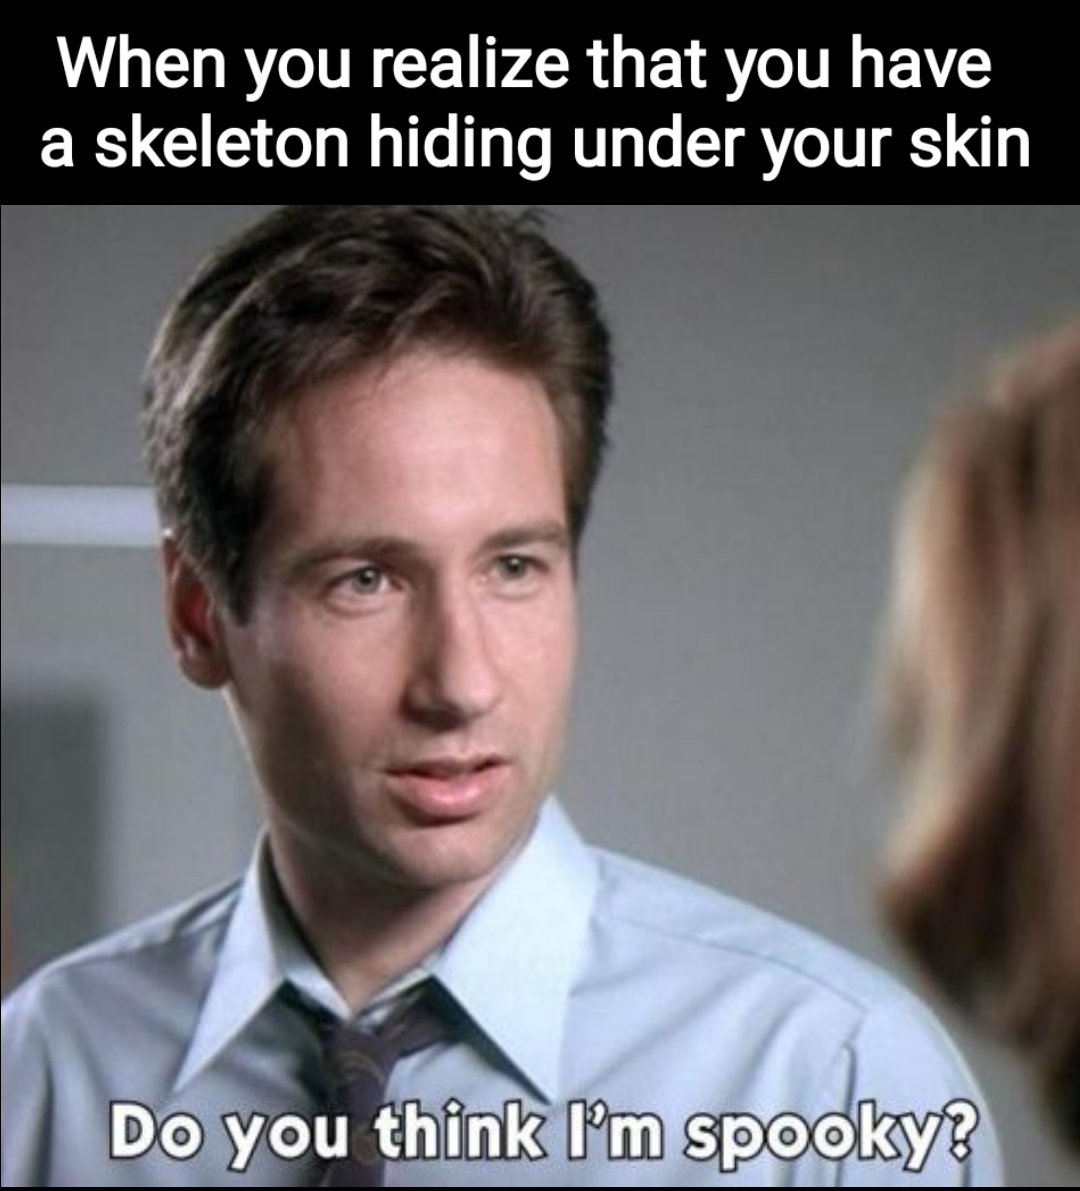 spooky mulder - When you realize that you have a skeleton hiding under your skin Do you think I'm spooky?